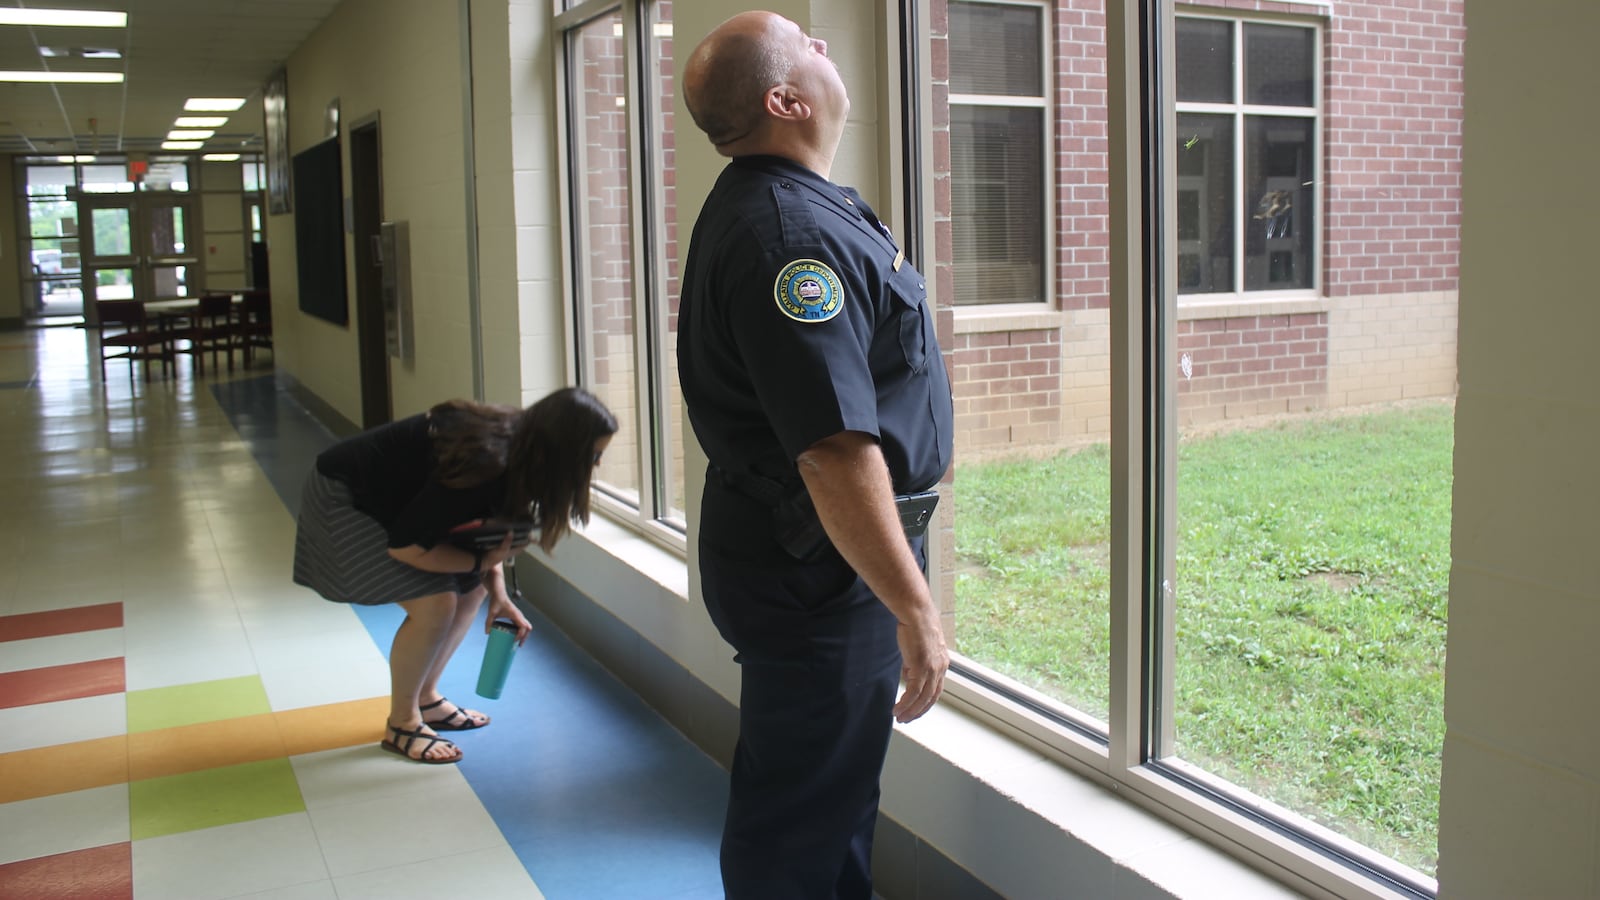 Sumner County Schools safety coordinator Katie Brown and Lt. Billy Vahldiek of Gallatin police examine the window pane in a school hallway to make sure the glass is shatter-resistant. The review team is one of more than a hundred across the state who conducted security assessments over the summer of every Tennessee public school.